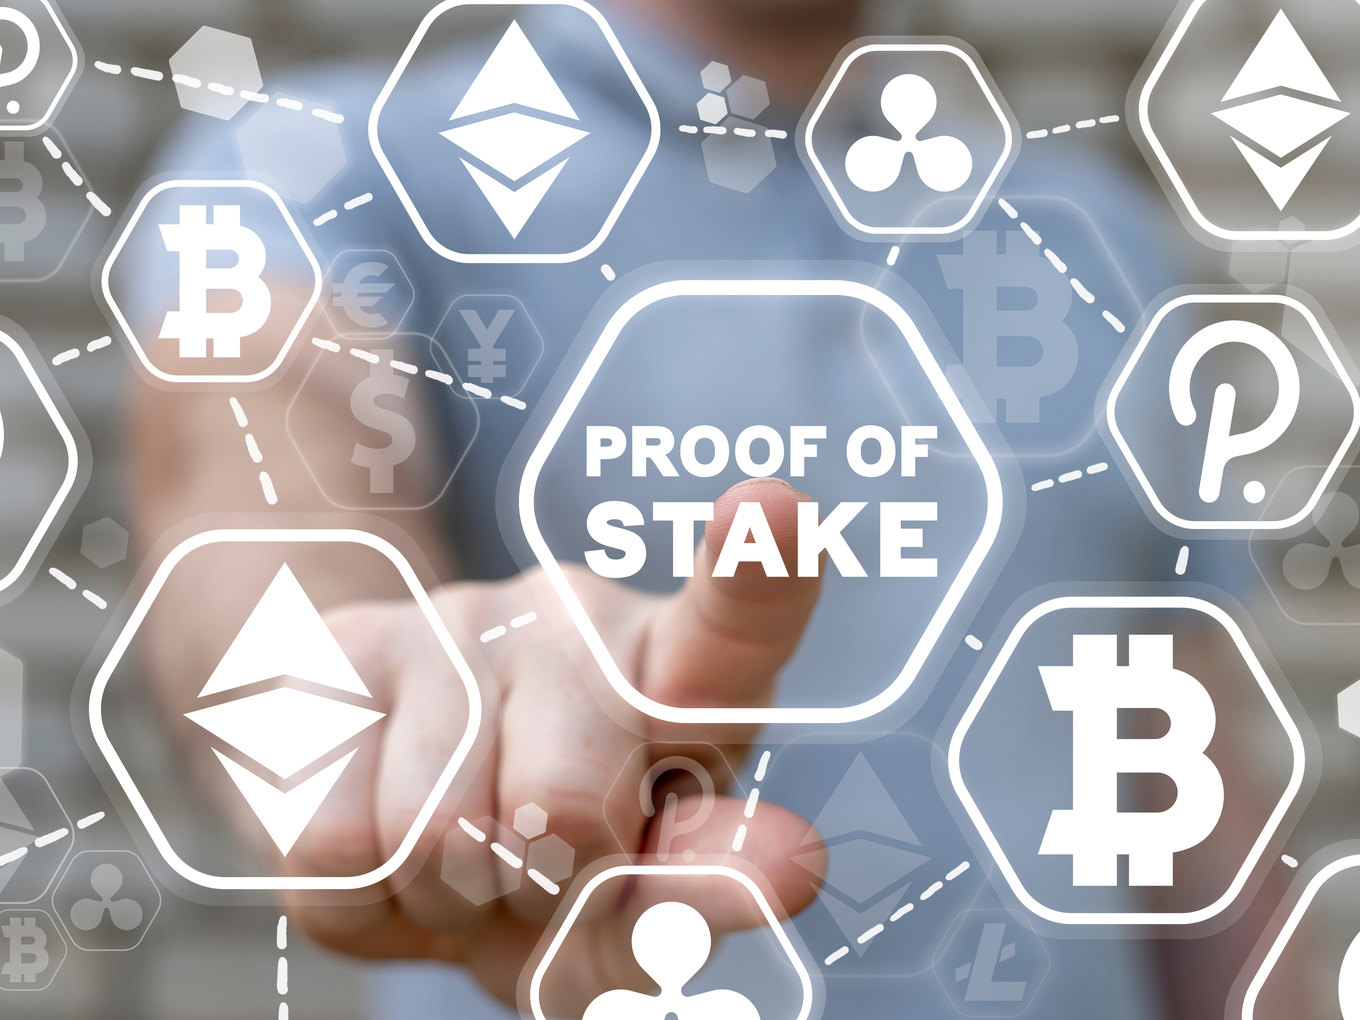 Crypto Staking Startup Stader Labs Raises $12.5 Mn In A Private Sale Summary Stader is a non-custodial smart contract-based staking platform that claims to help retail investors and institutions discover and access staking solutions According to the startup, its modular smart contracts and staking middleware infrastructure for PoS (proof-of-stake) networks can be leveraged by retail users, exchanges, custodians and mainstream fintech players Some outlets have mistakenly reported the valuation of the startup to the $450 Mn, but that figure is actually the fully-diluted market capitalisation of the token network, not the startup Cryptocurrency staking management startup Stader Labs has raised $12.5 Mn in a private sale led by Three Arrows Capital.